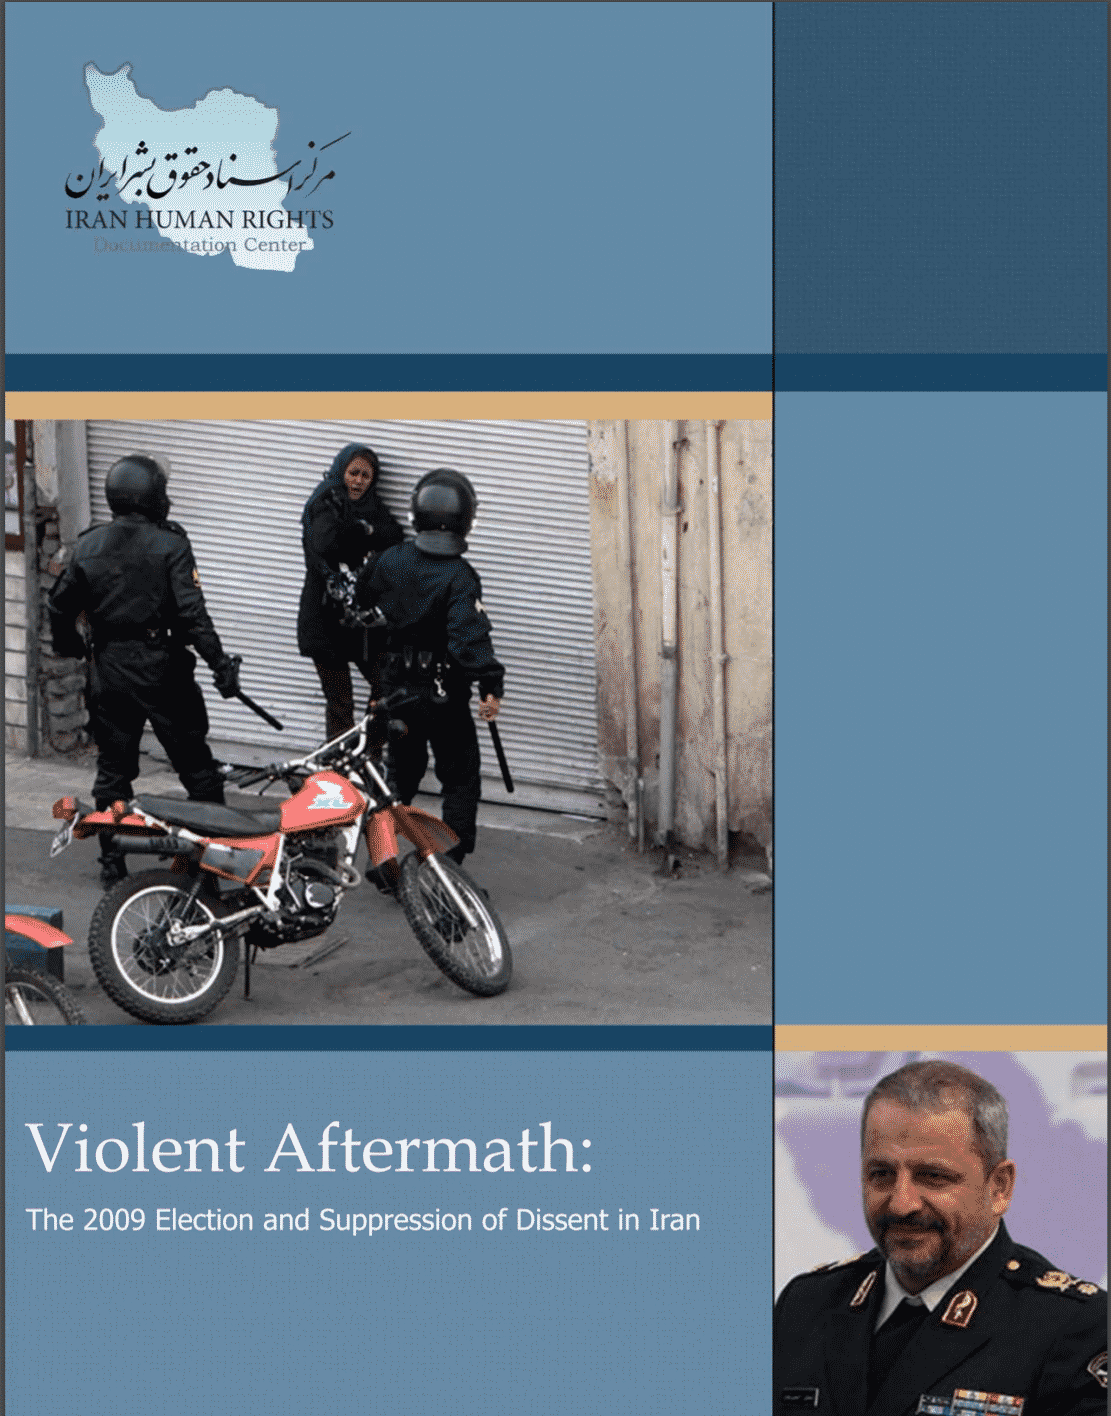 Violent Aftermath The 2009 Election and Suppression of Dissent in Iran